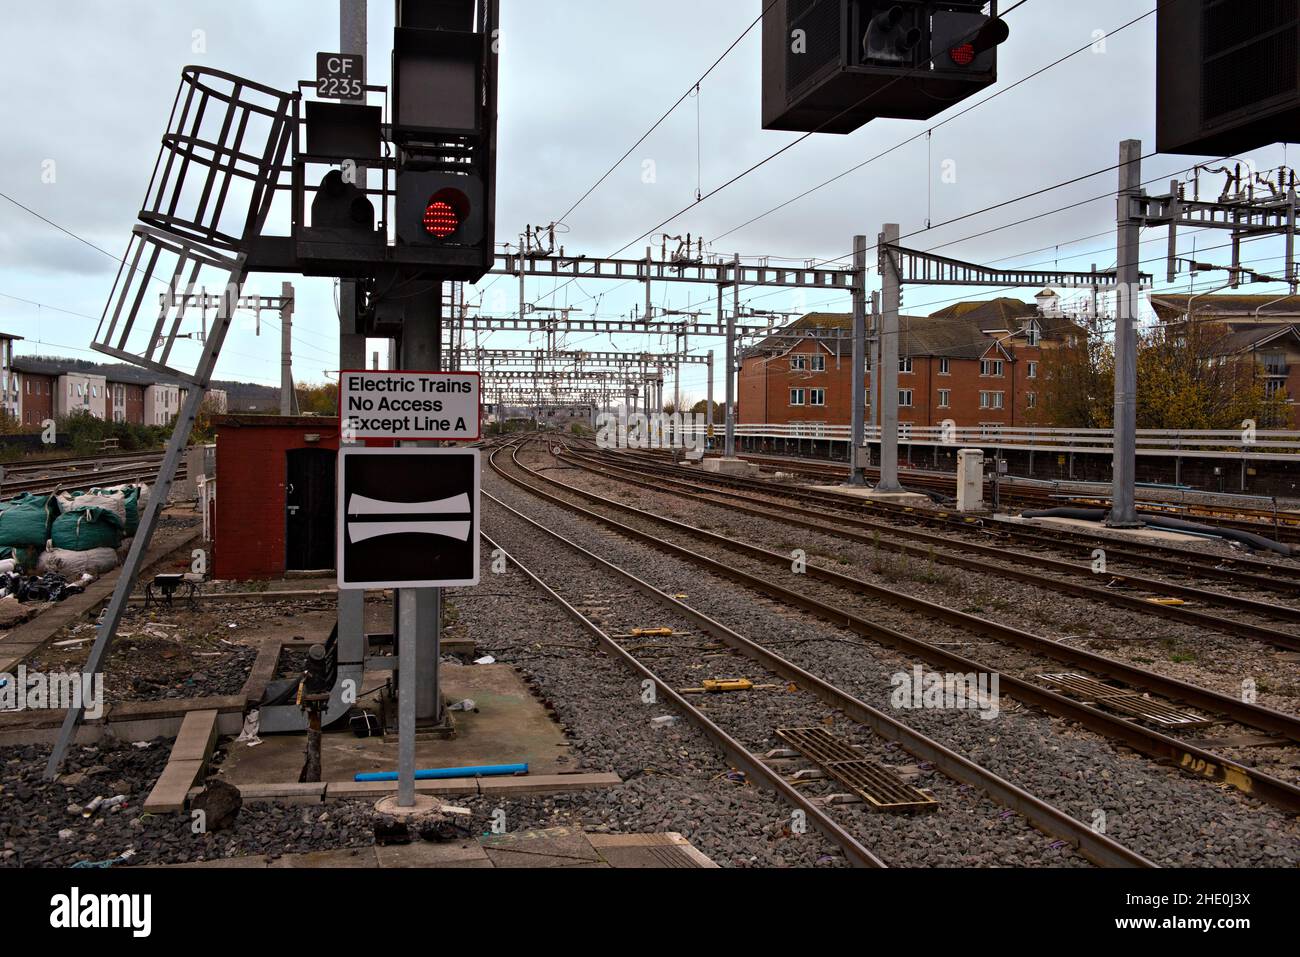 Cardiff Central Railway Station, Wales, United Kingdom The newly electrified infrastructure is evident Stock Photo